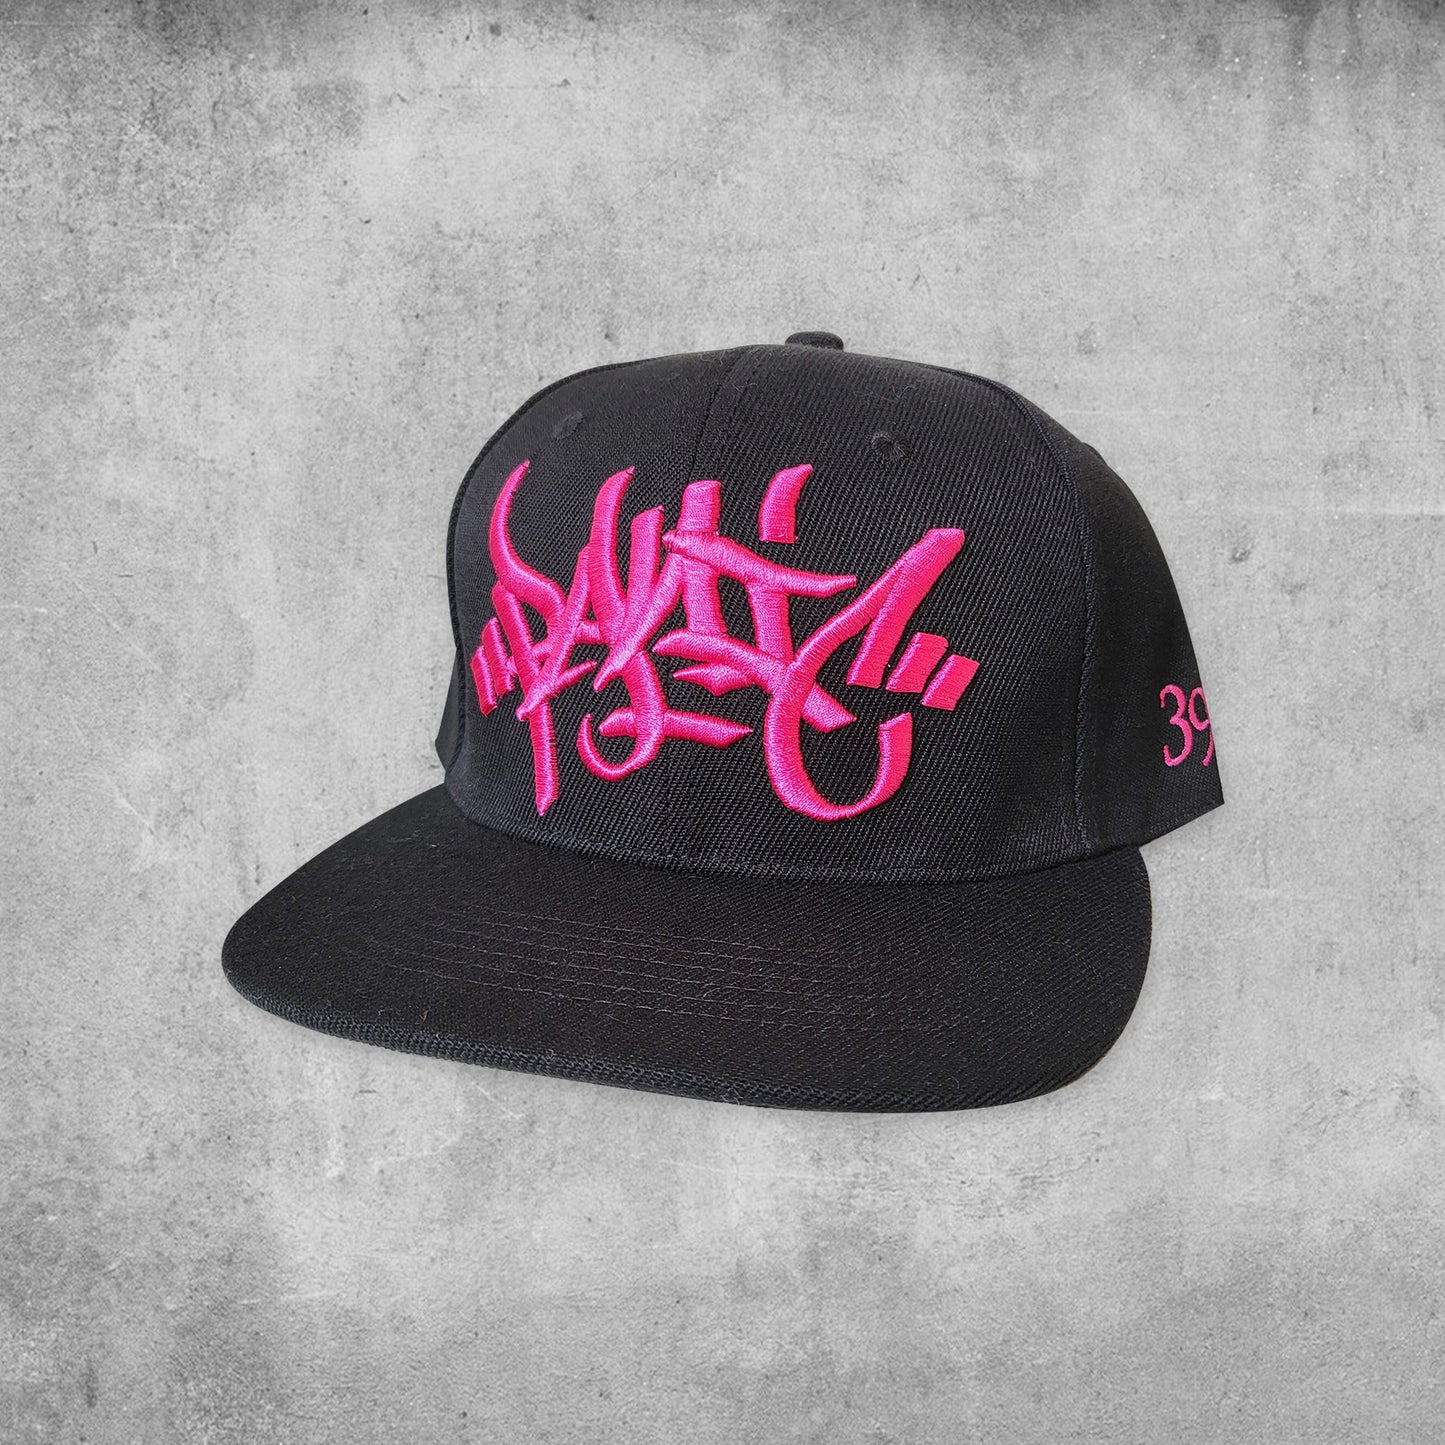 Panic 39 branded snap back hat in black with pink puff embroidery.